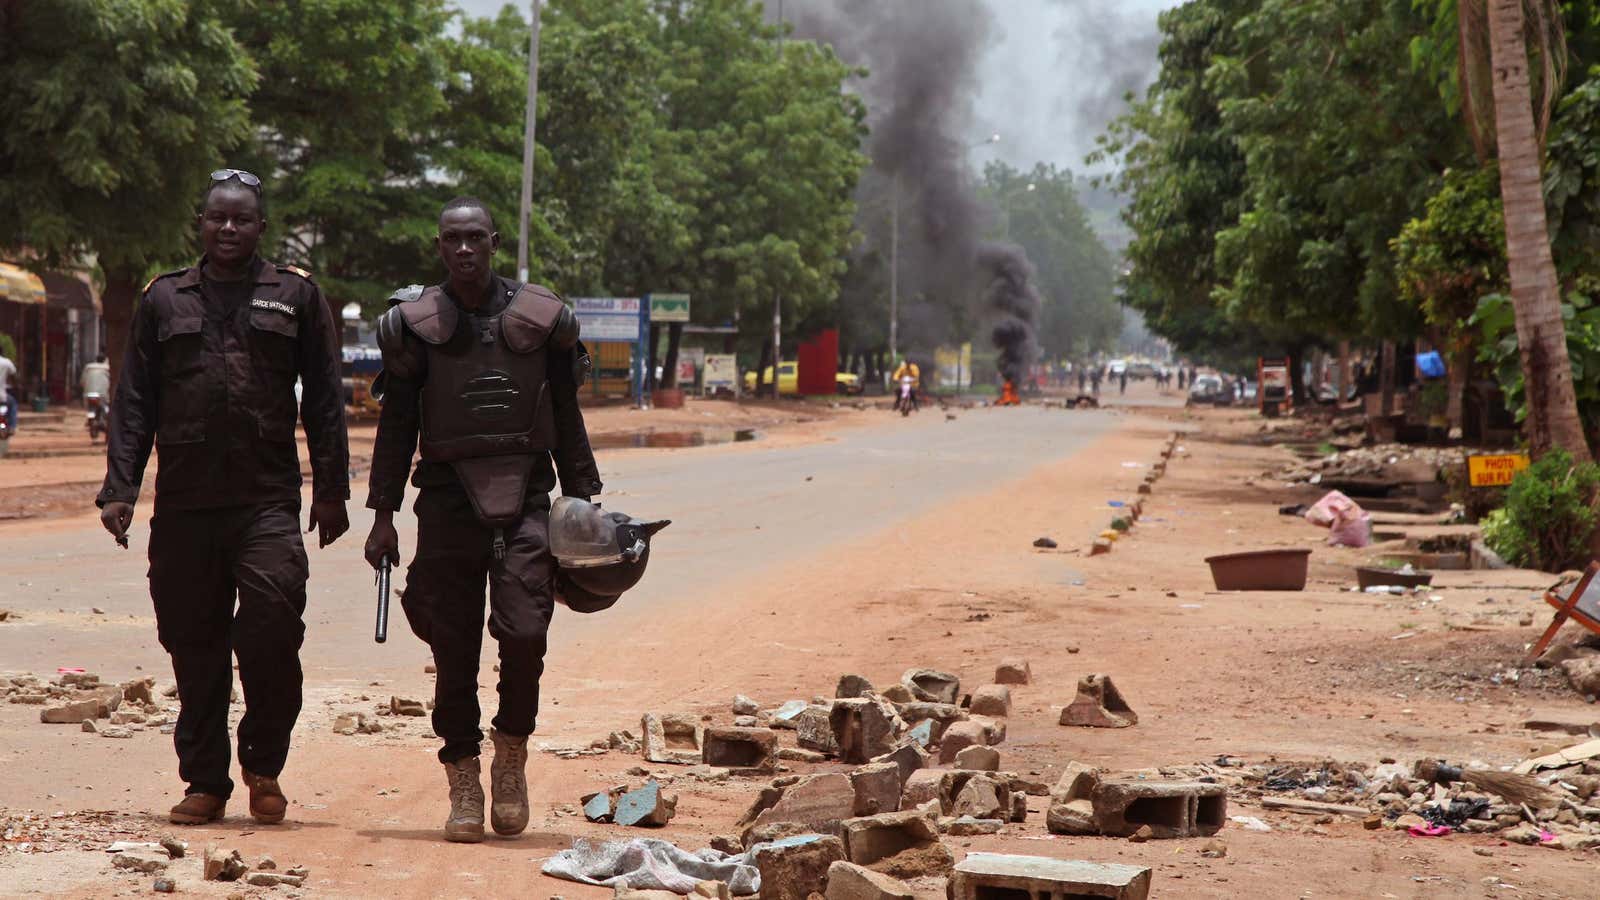 Police survey the scene after a protest, in Bamako, Mali on Aug. 17.